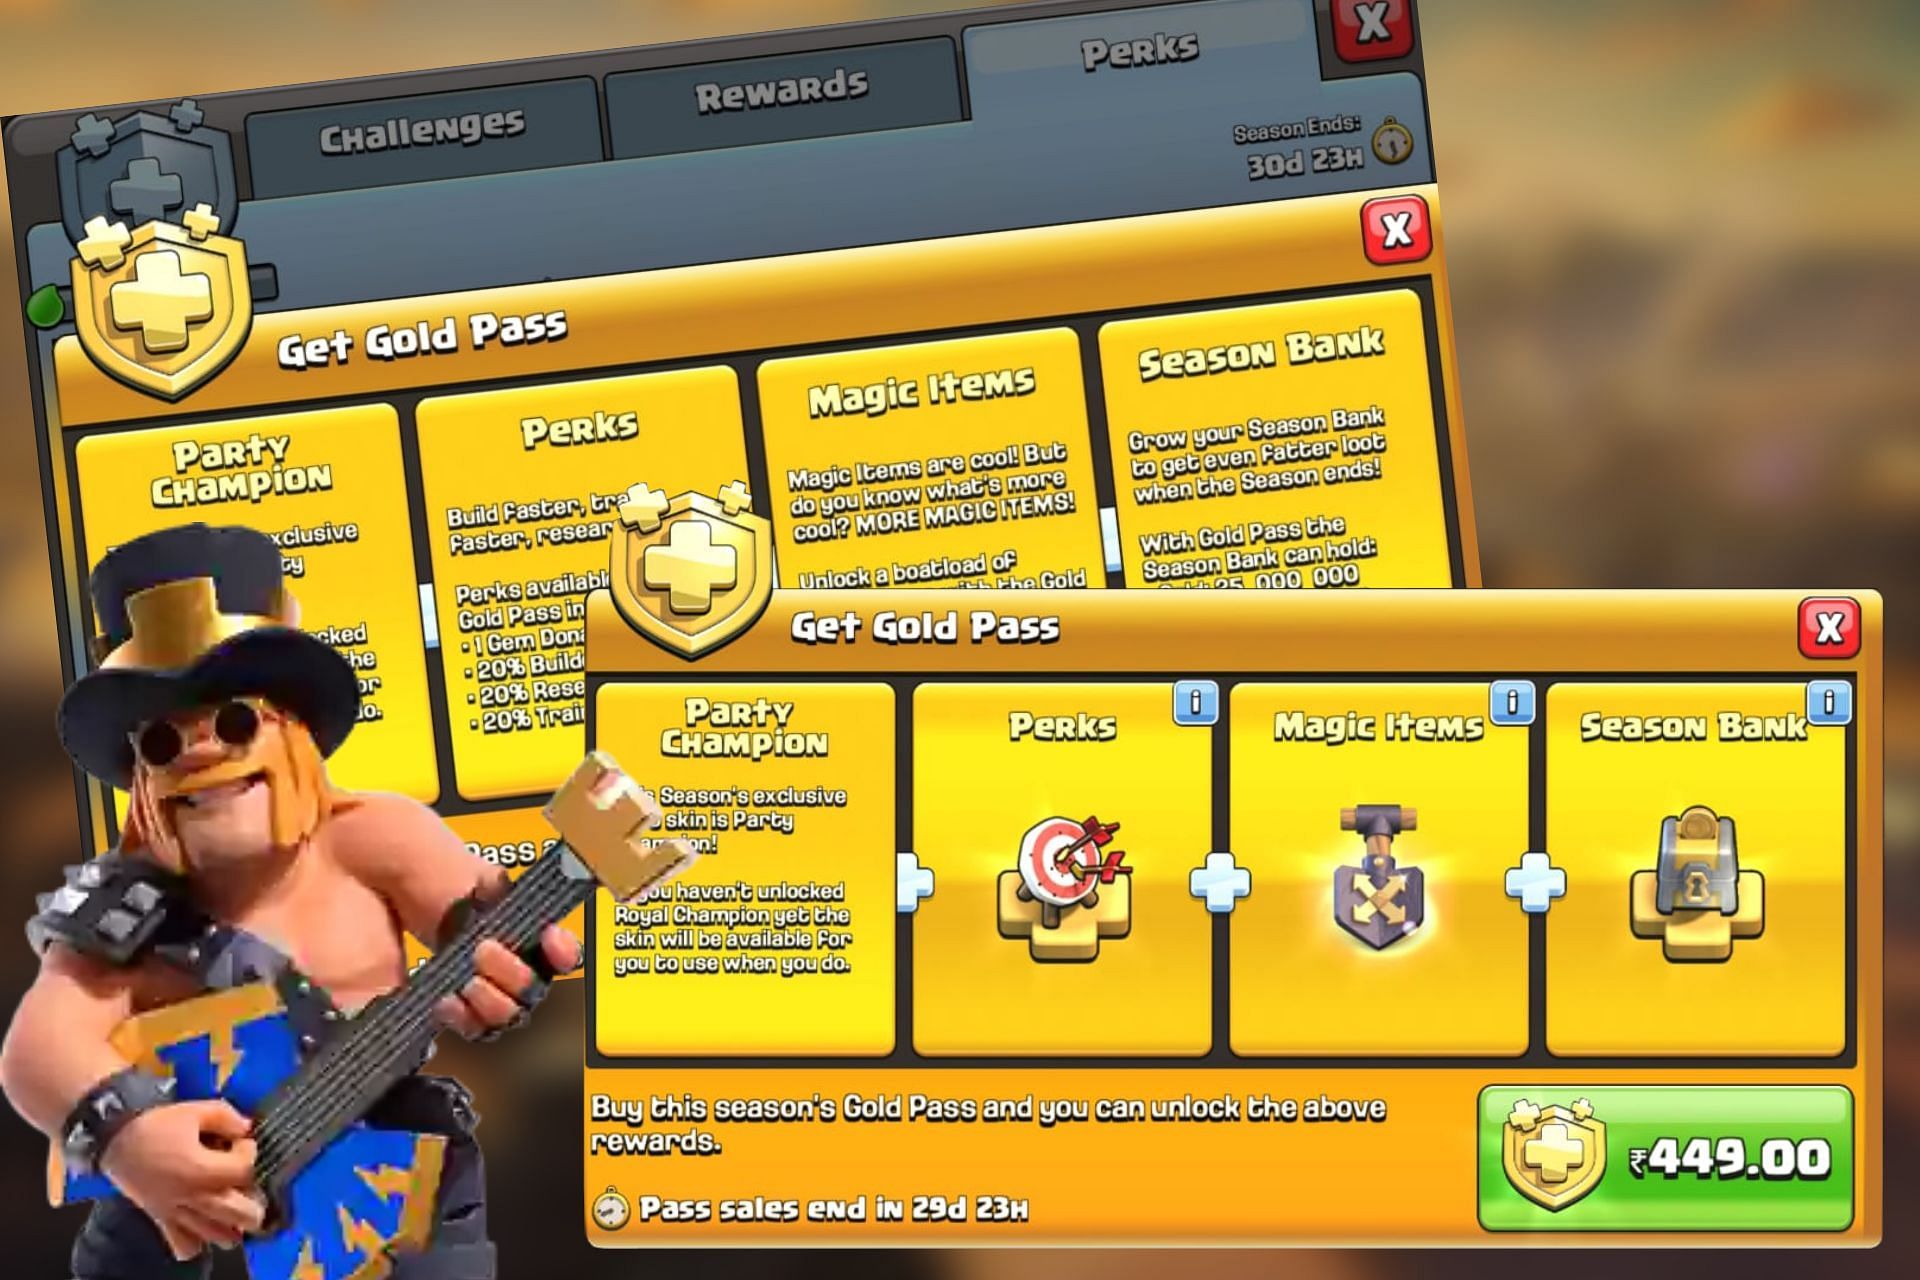 August Gold Pass in Clash of Clans (Image via Sportskeeda)